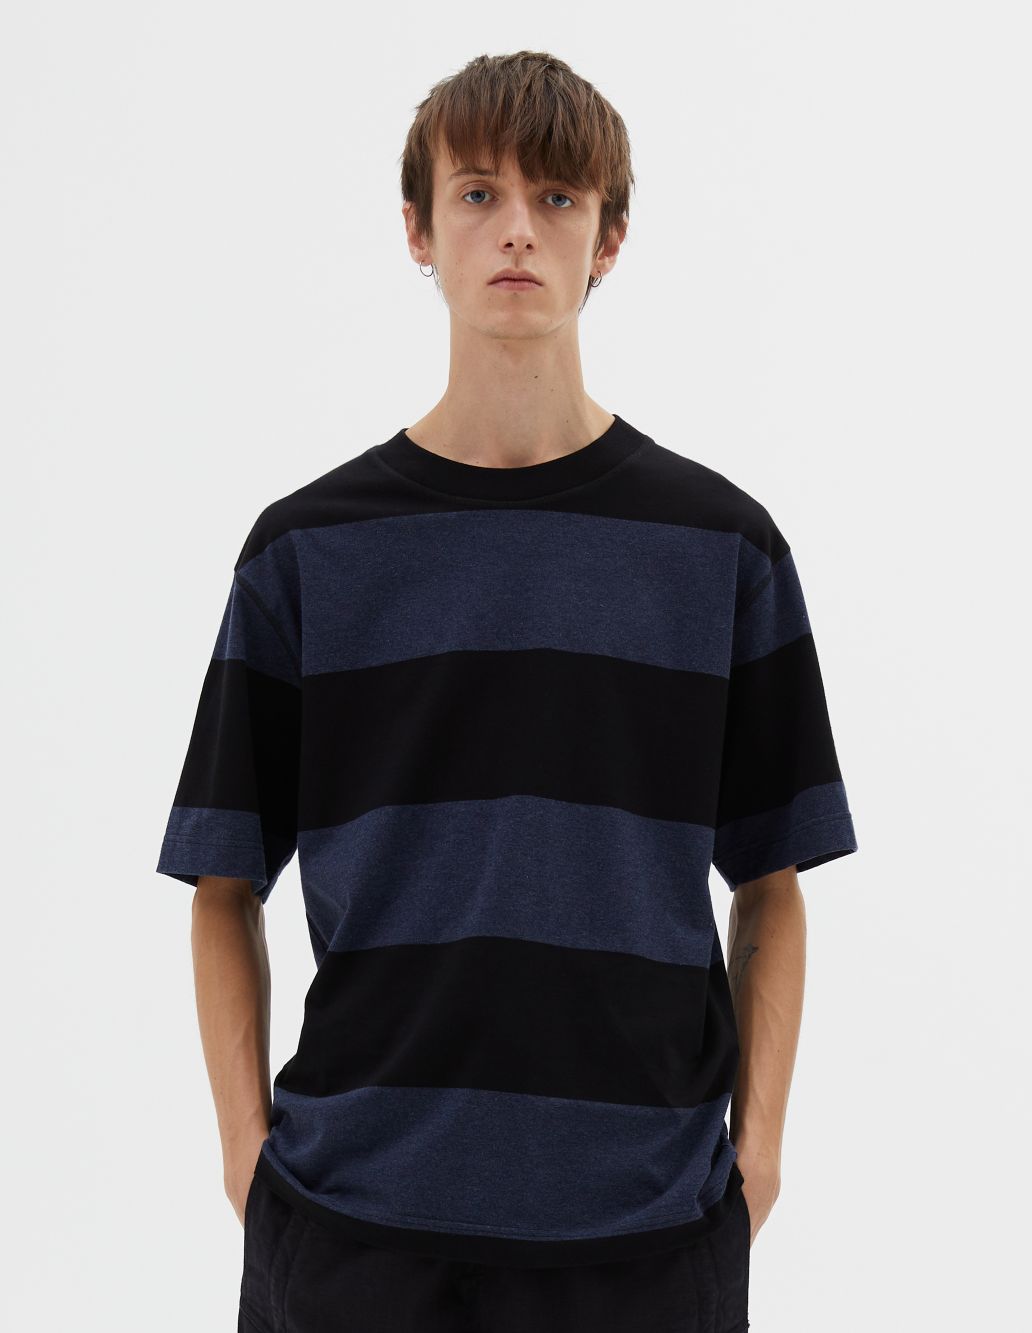 MARGARET HOWELL - Black and blue marl stripe T shirt | MHL. by 